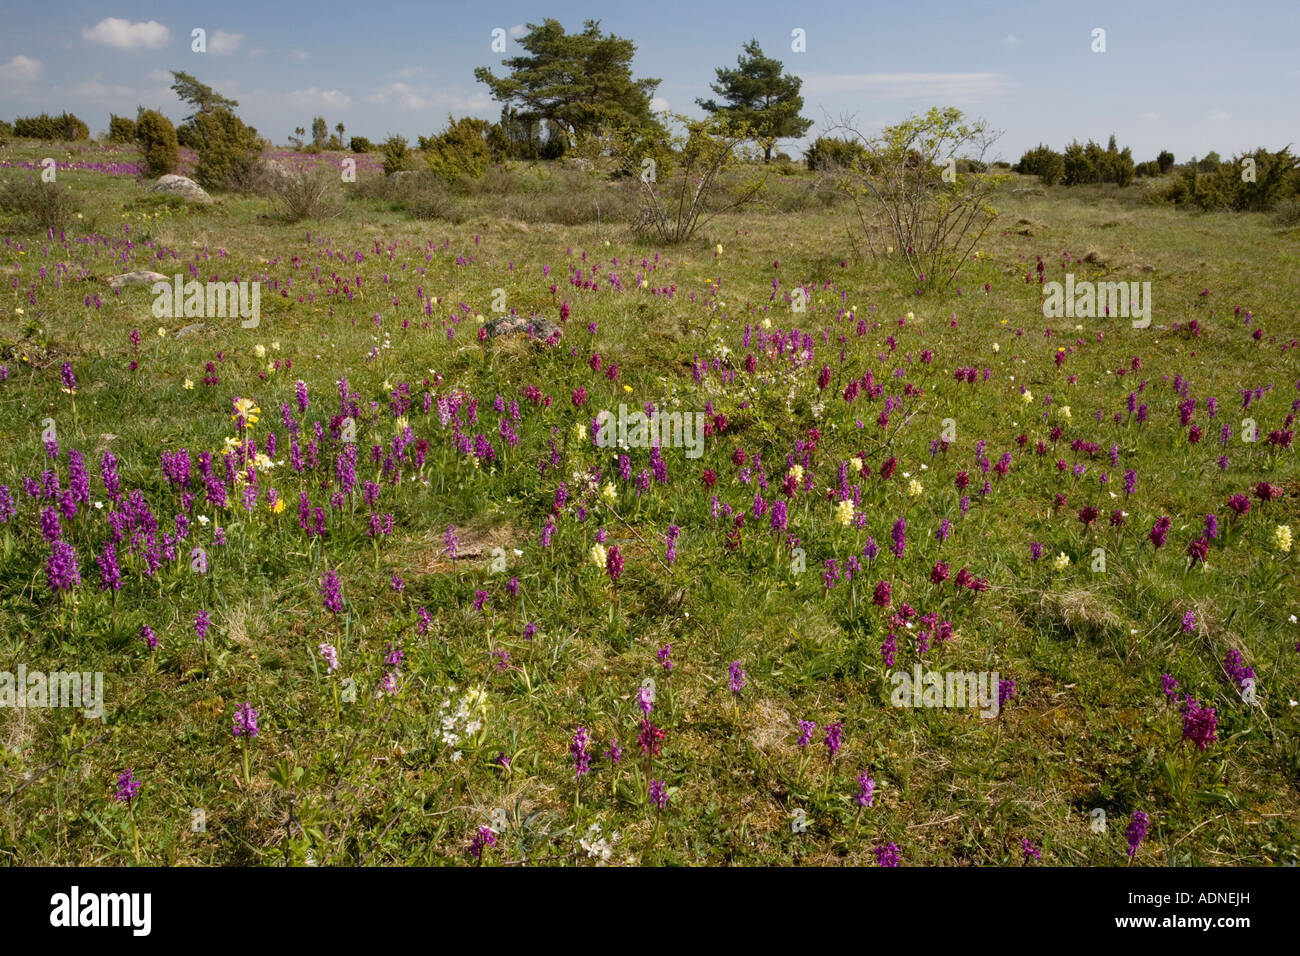 Mass of early purple orchids Orchis mascula and elder flowered orchids Dactylorhiza sambucina in old limestone grassland Stock Photo